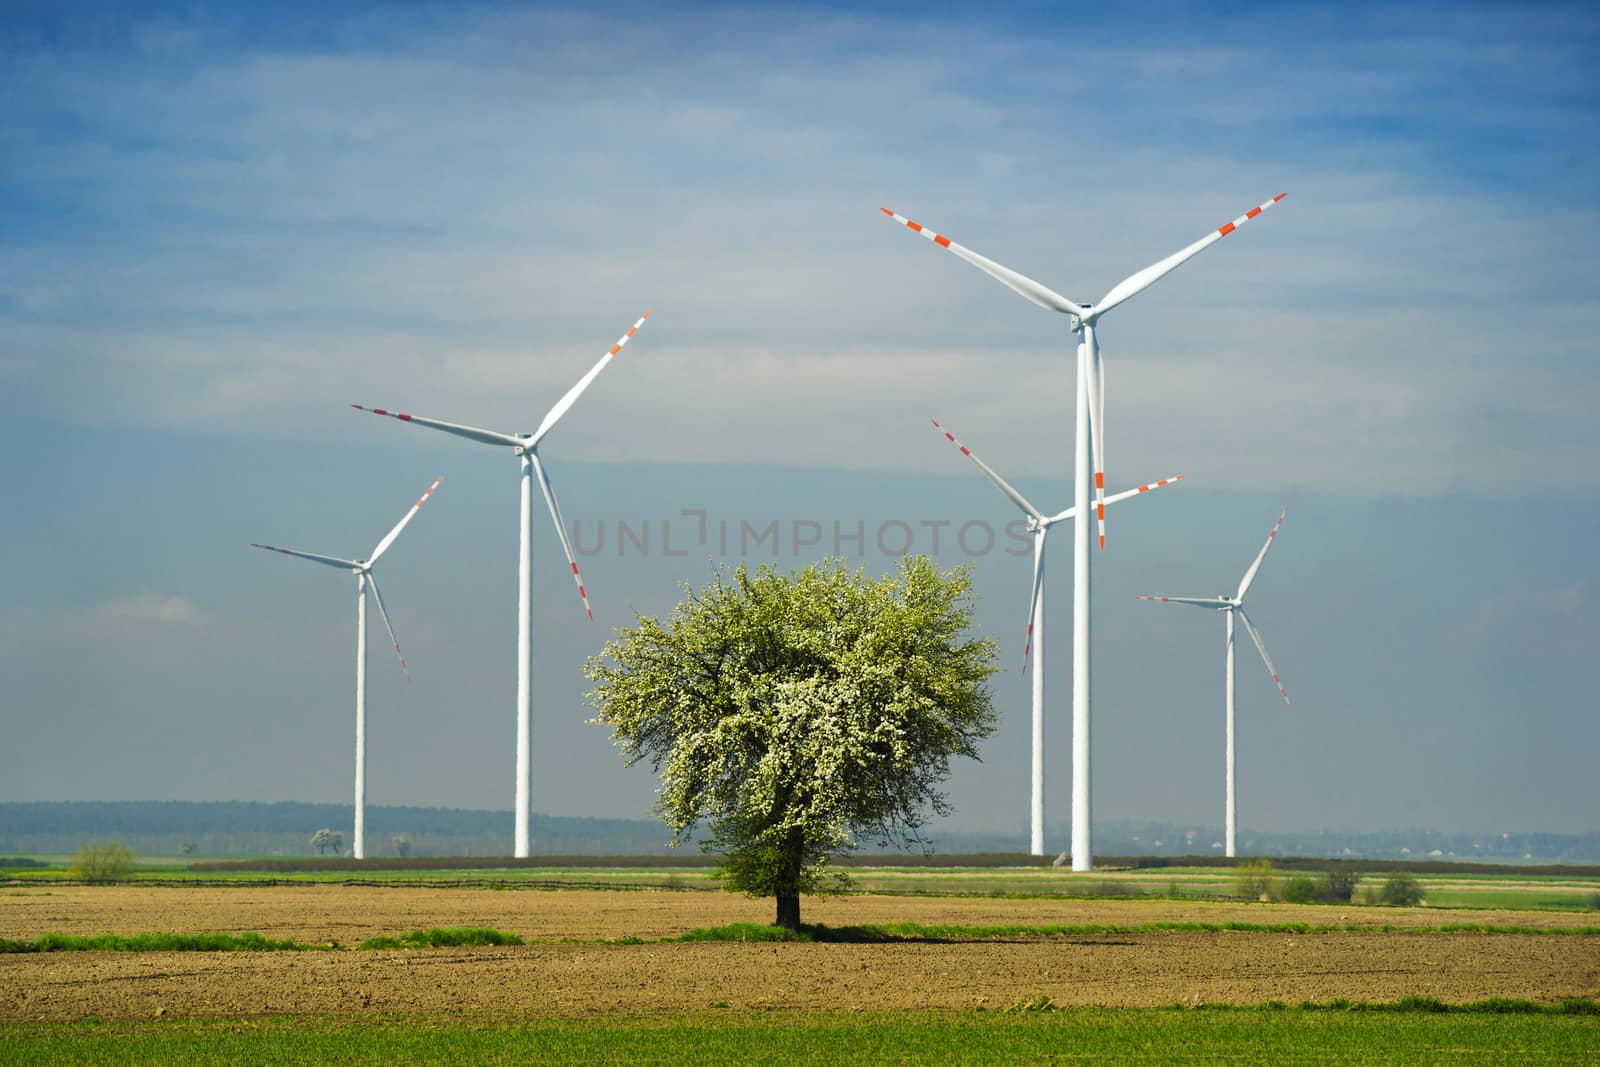 Wind turbine (farm, windpark, electric windmill) and a tree on the field and blue sky.